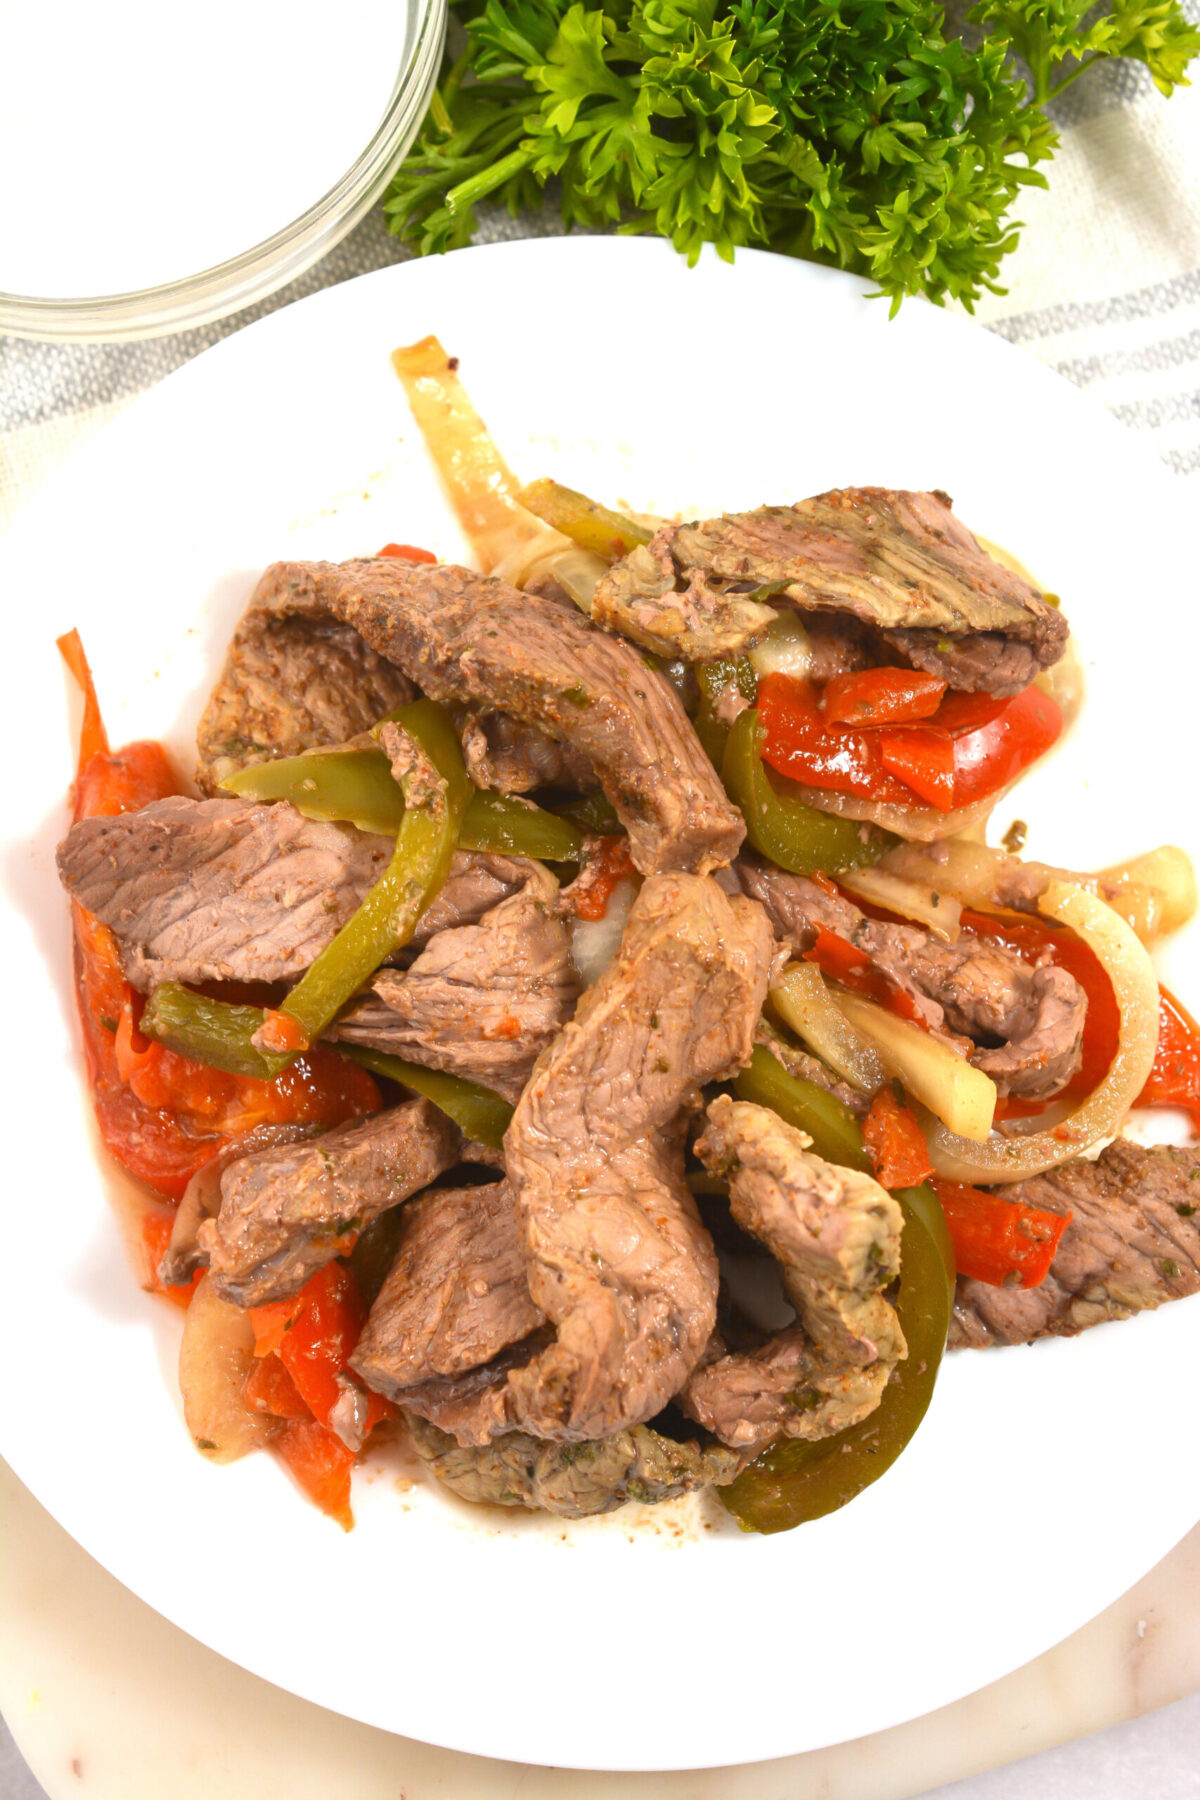 Healthy and loaded with flavor, these Steak Fajitas are easily made in the crock pot! Tender, juicy steak with a delicious fajita seasoning.